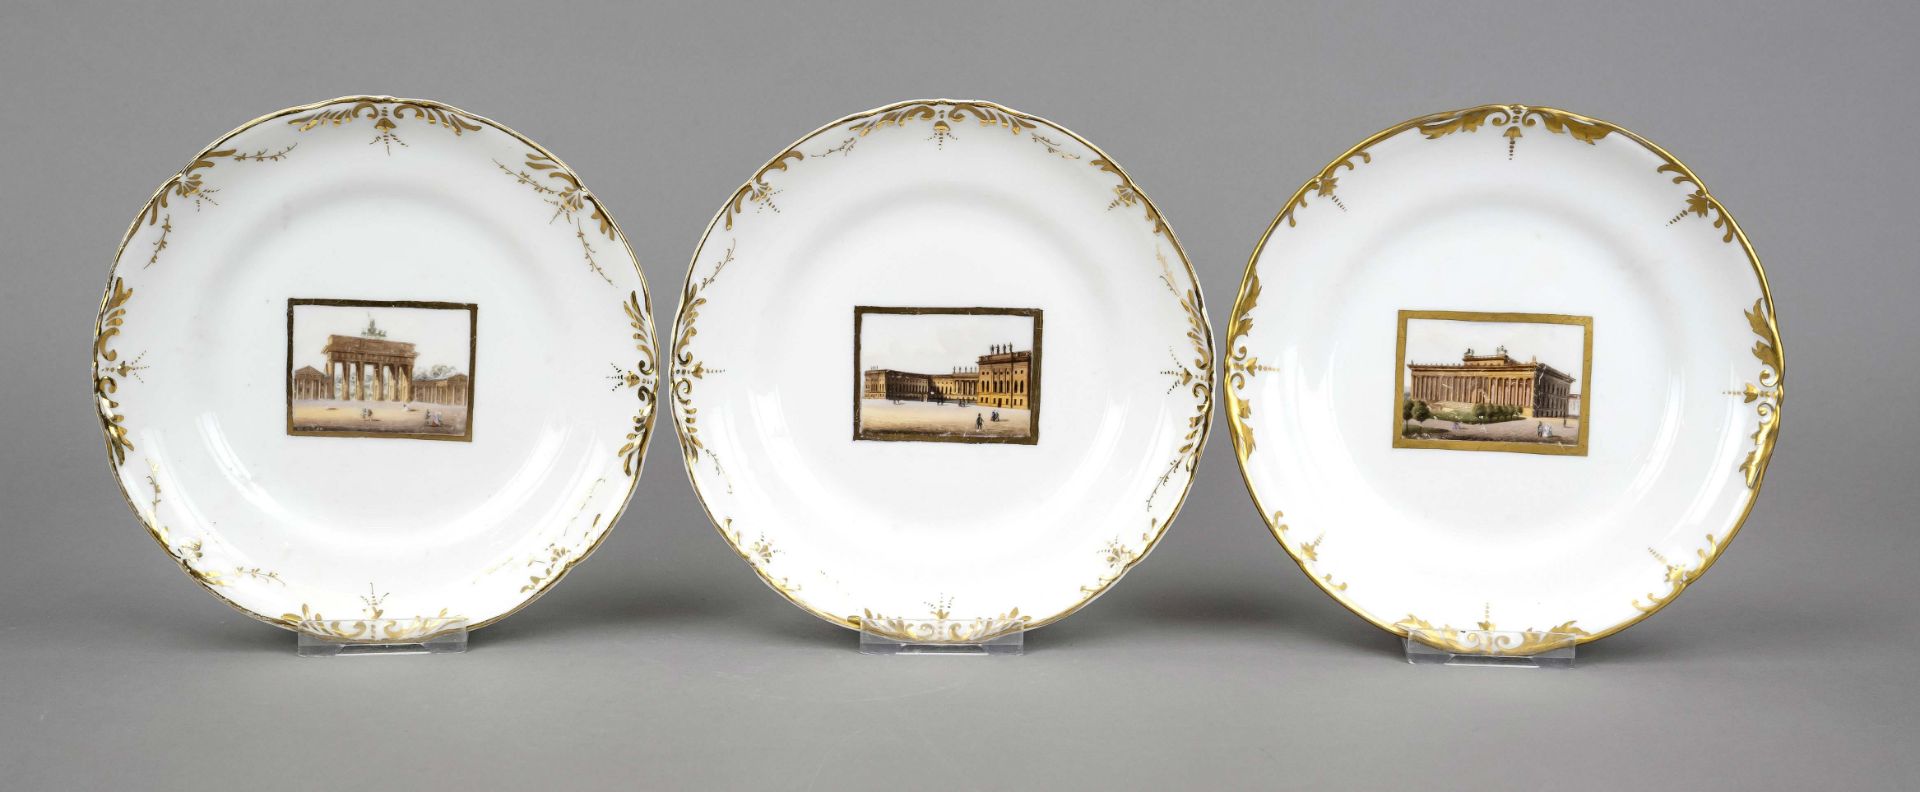 Three view plates, Schumann Berlin Moabit, c. 1850, gold-framed cartouche in the mirror, finely